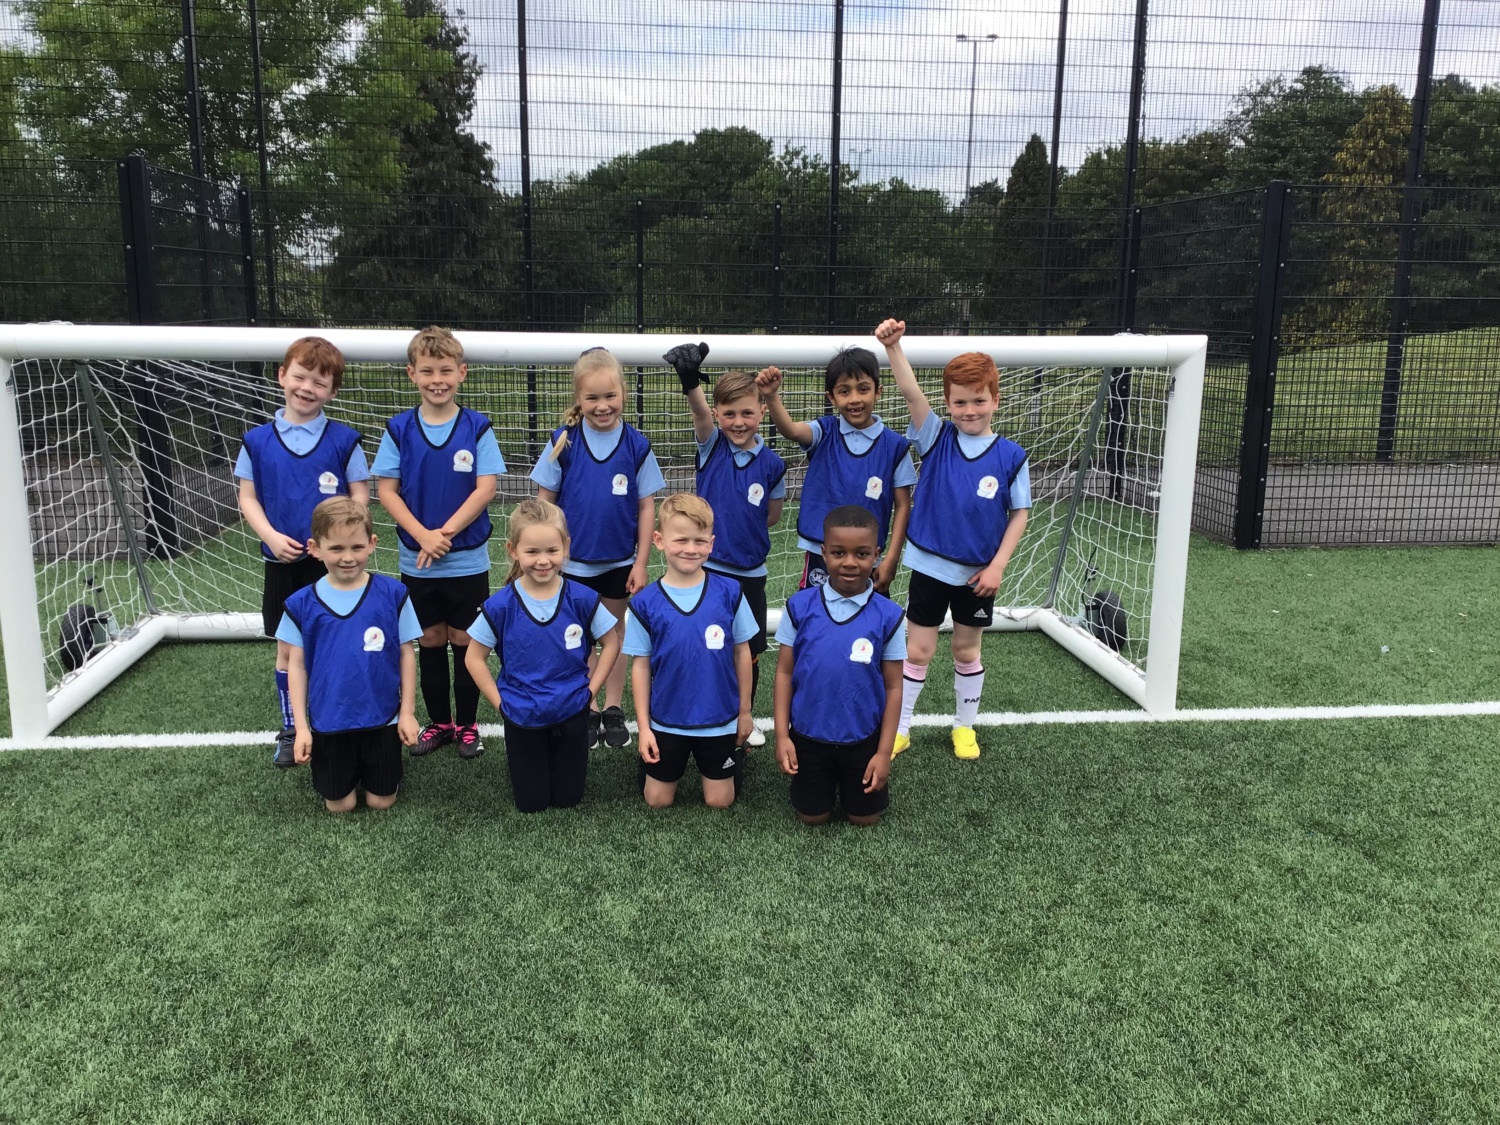 A team of children wearing blue, smiling for a photo in front of a goal